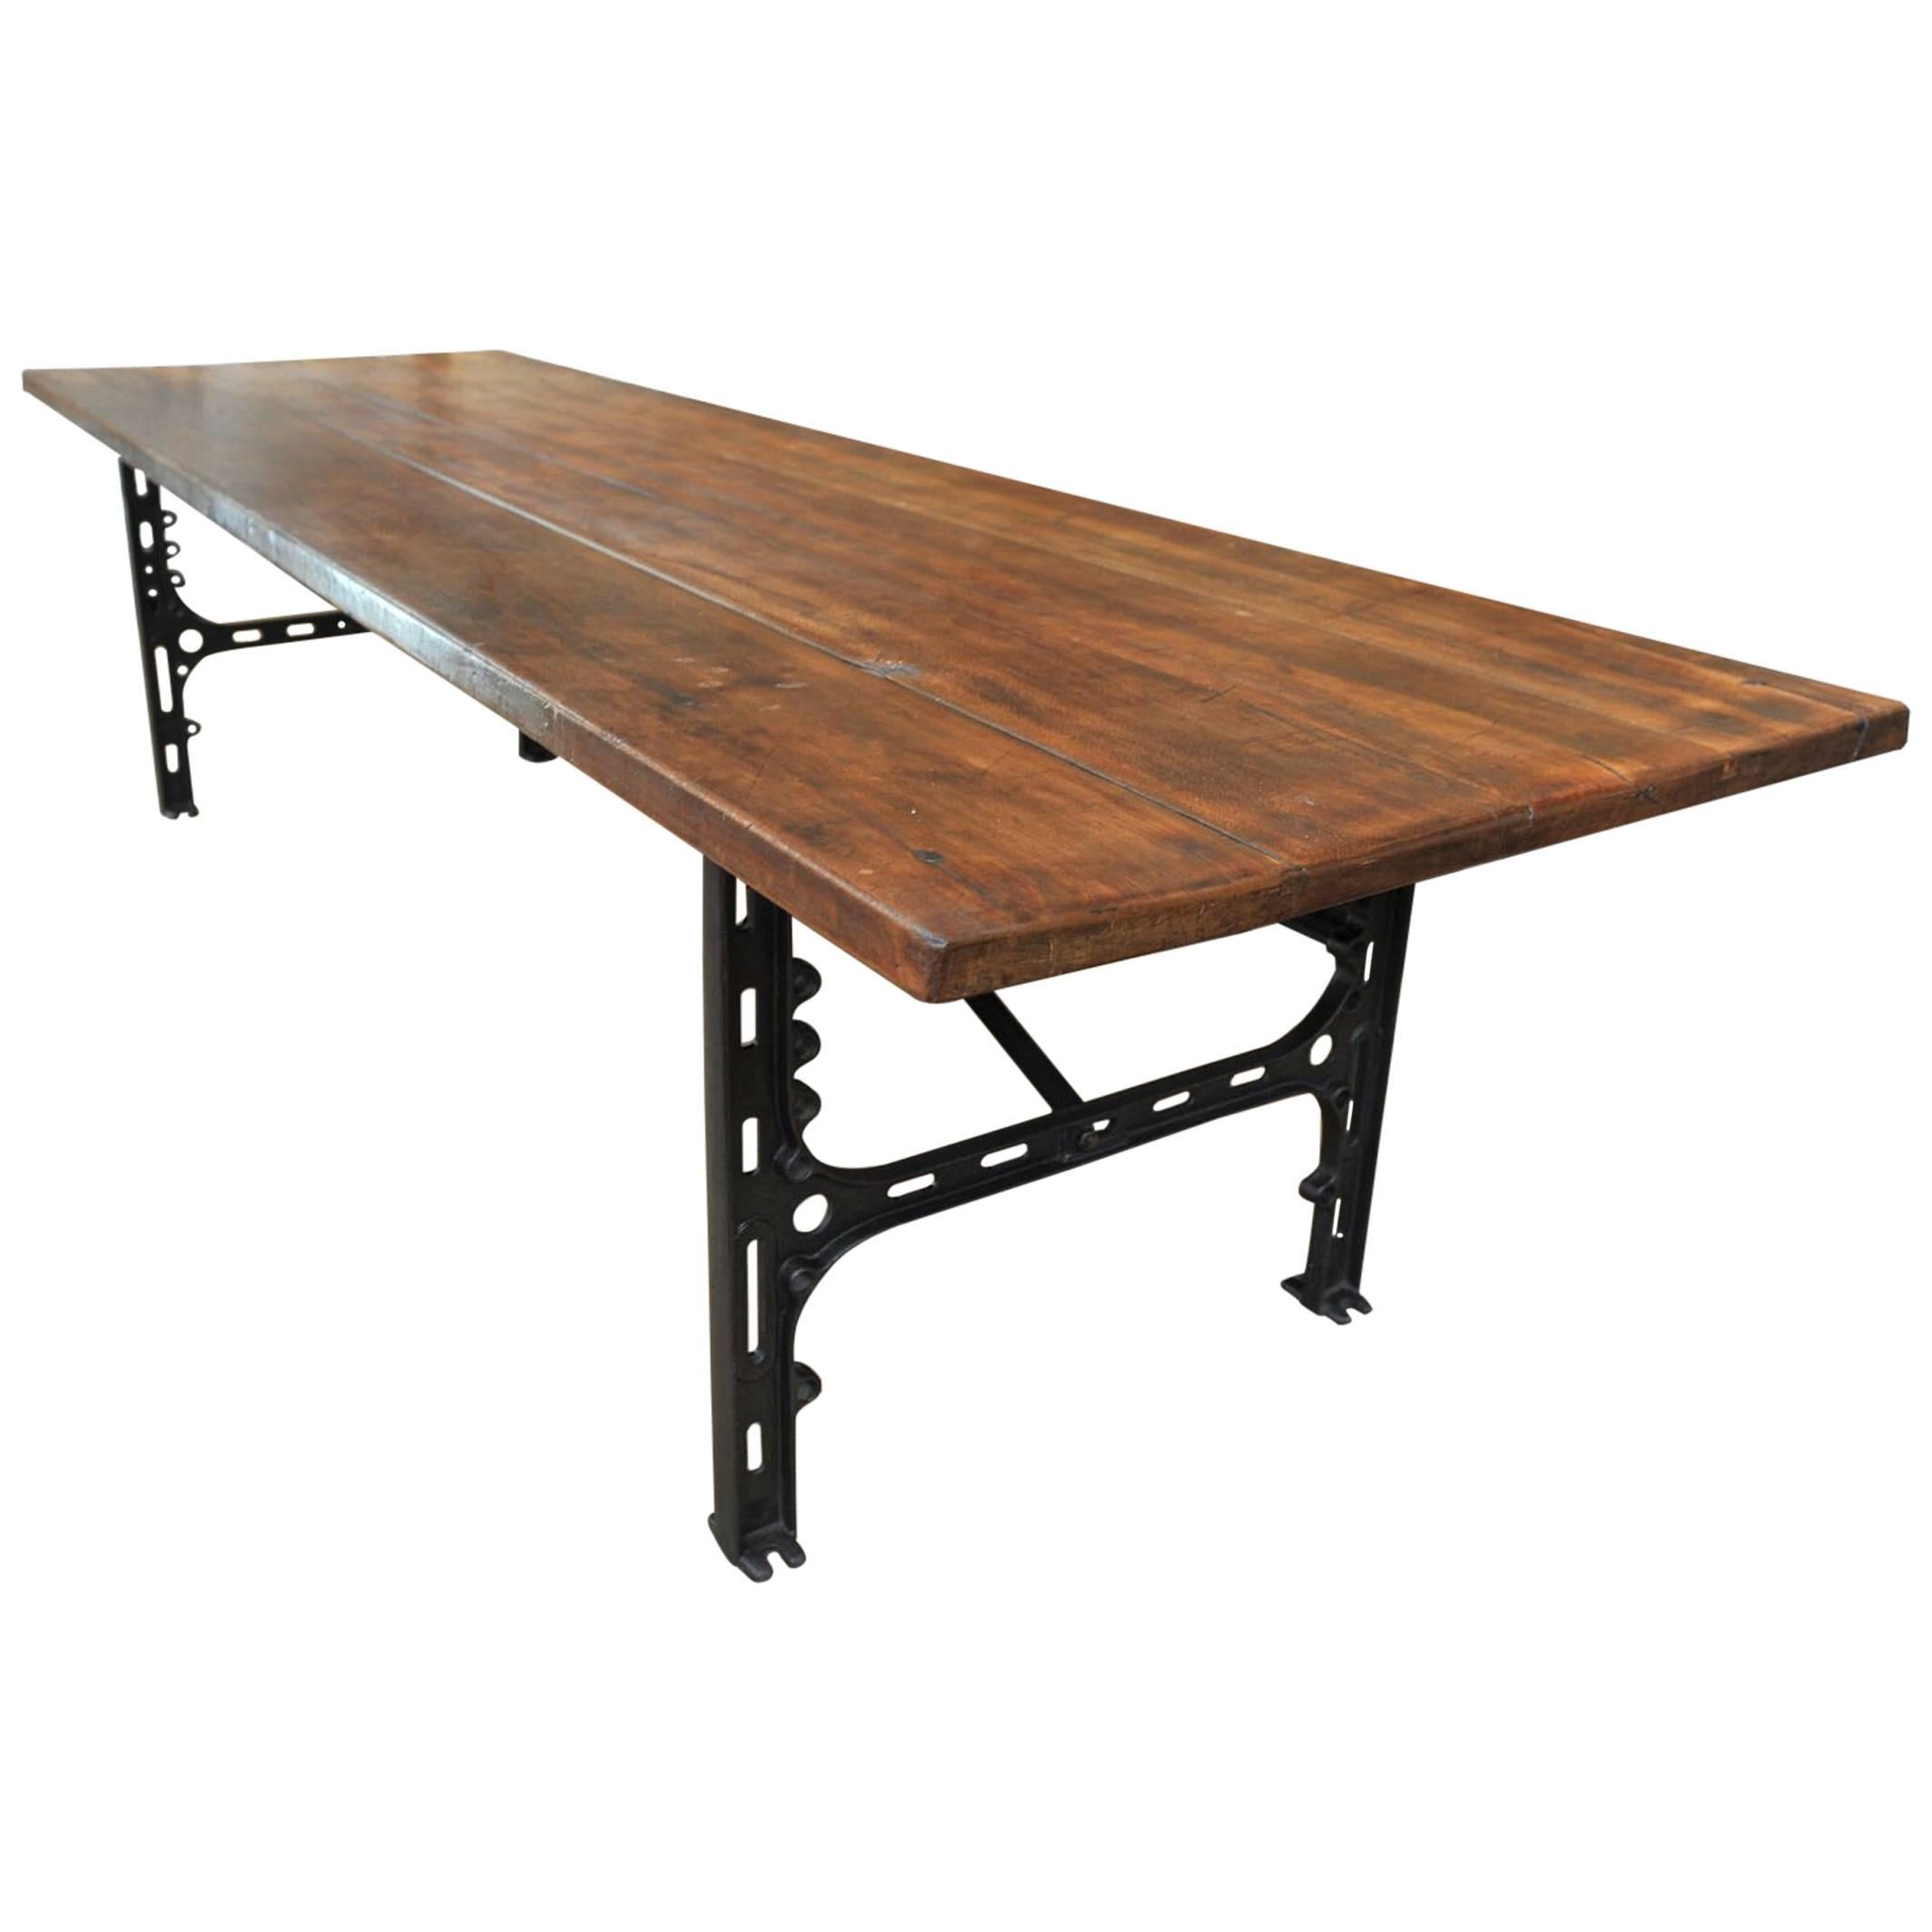 Singer Cast Iron and Beechwood Industrial Dining Table